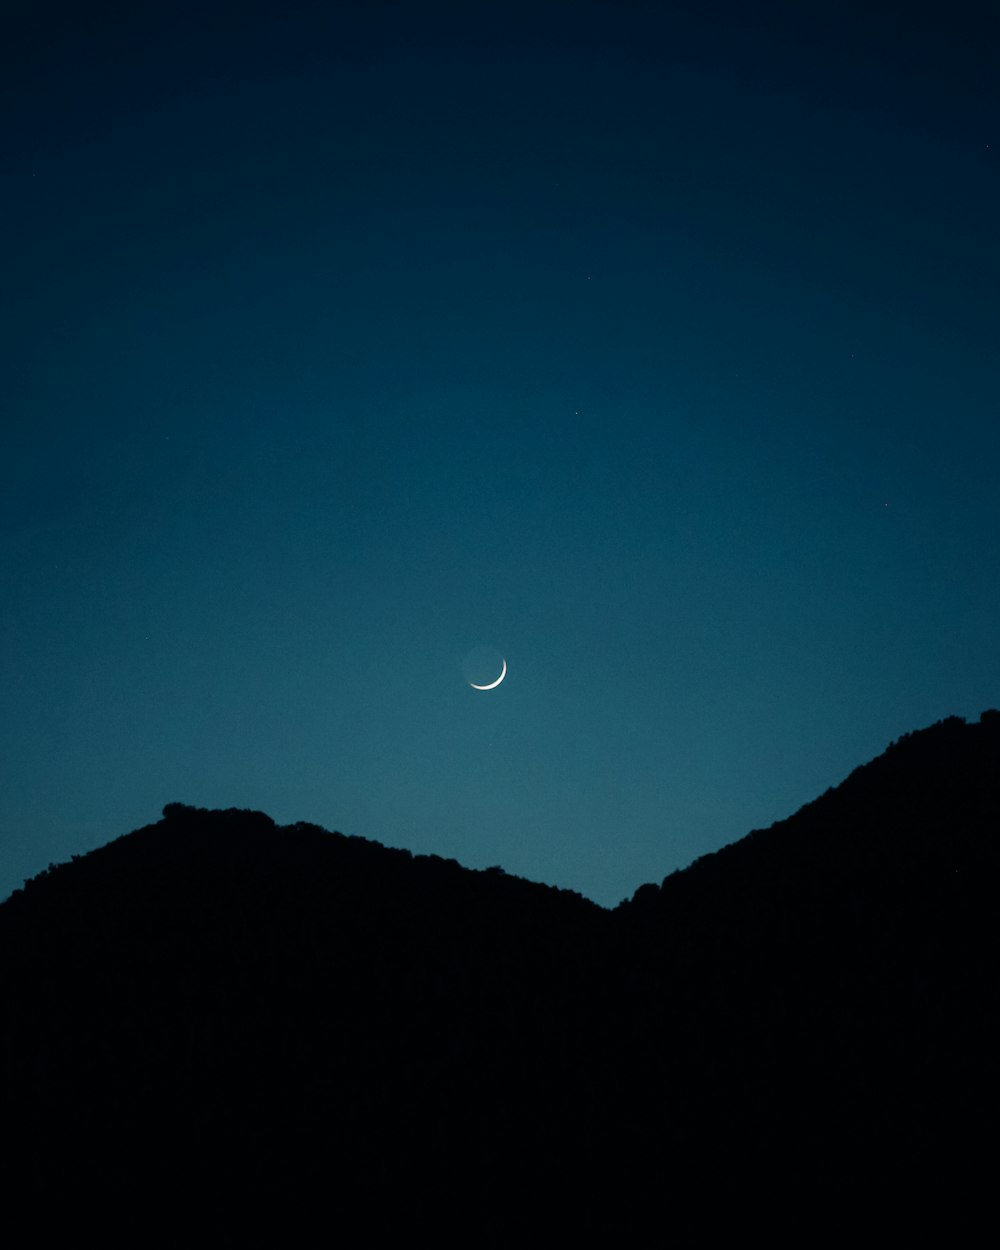 the moon is seen in the sky above a mountain